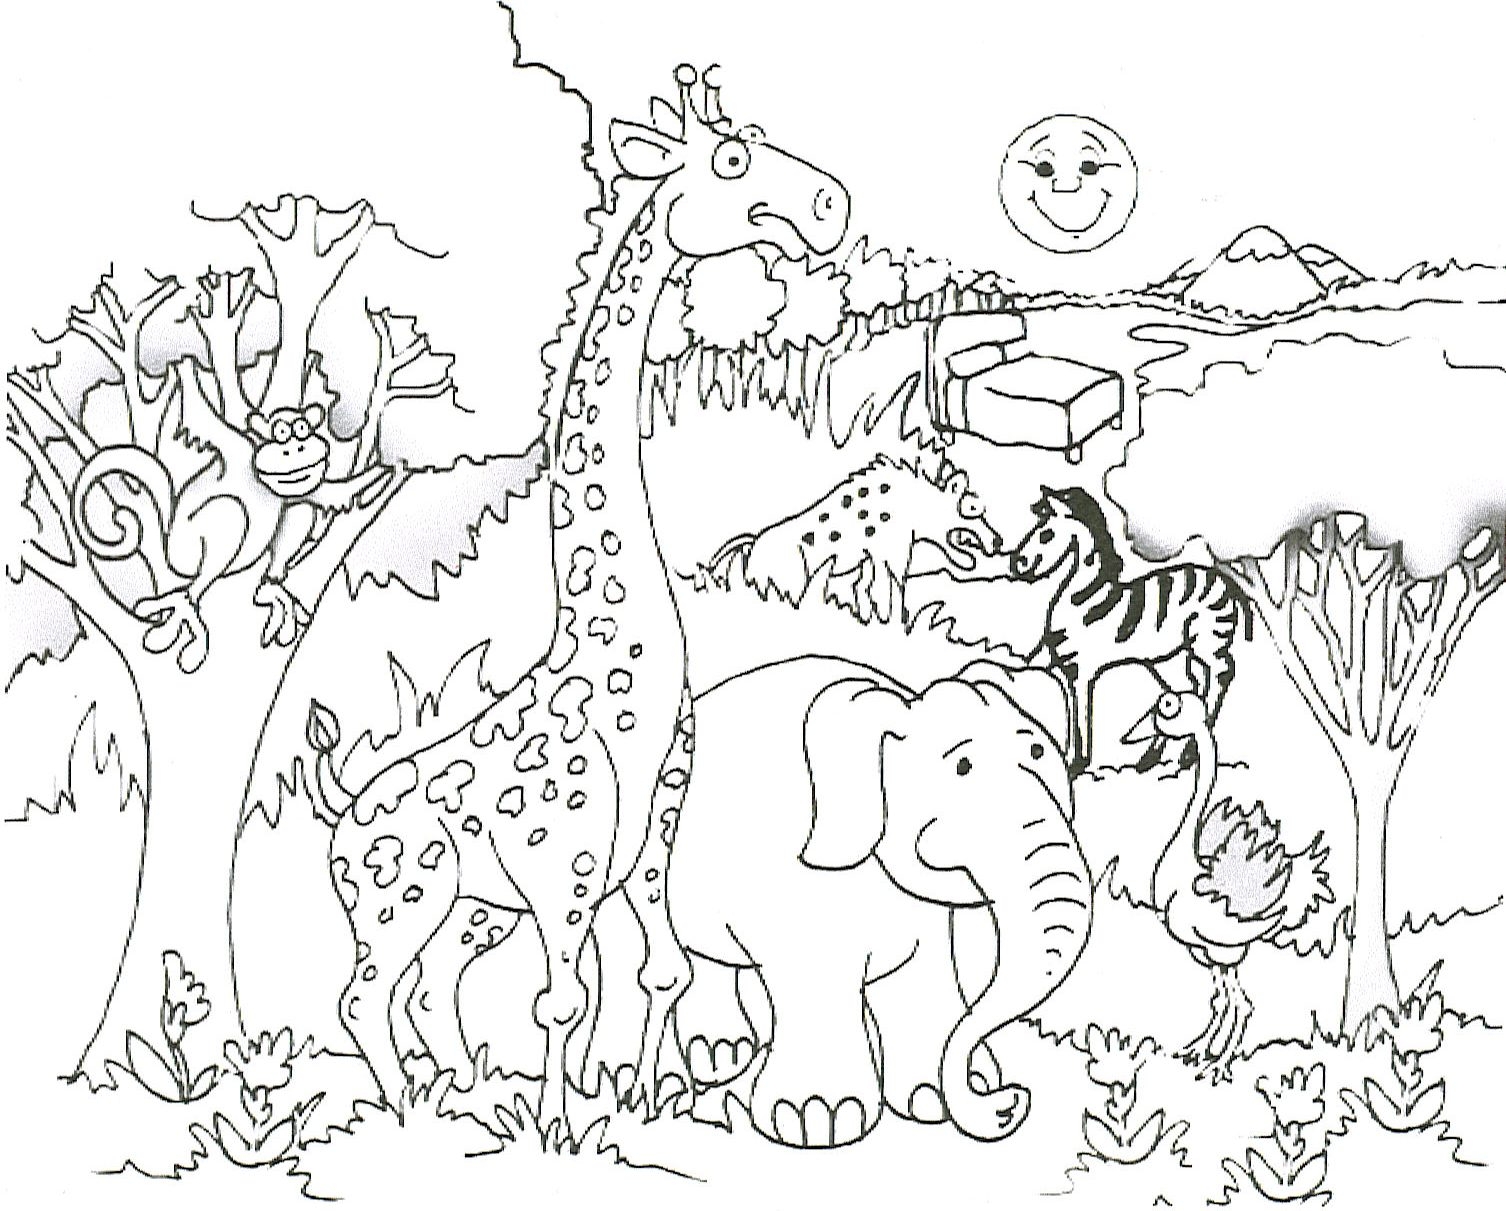 Giraffe And His Friends Coloring Page   Free Printable Coloring ...